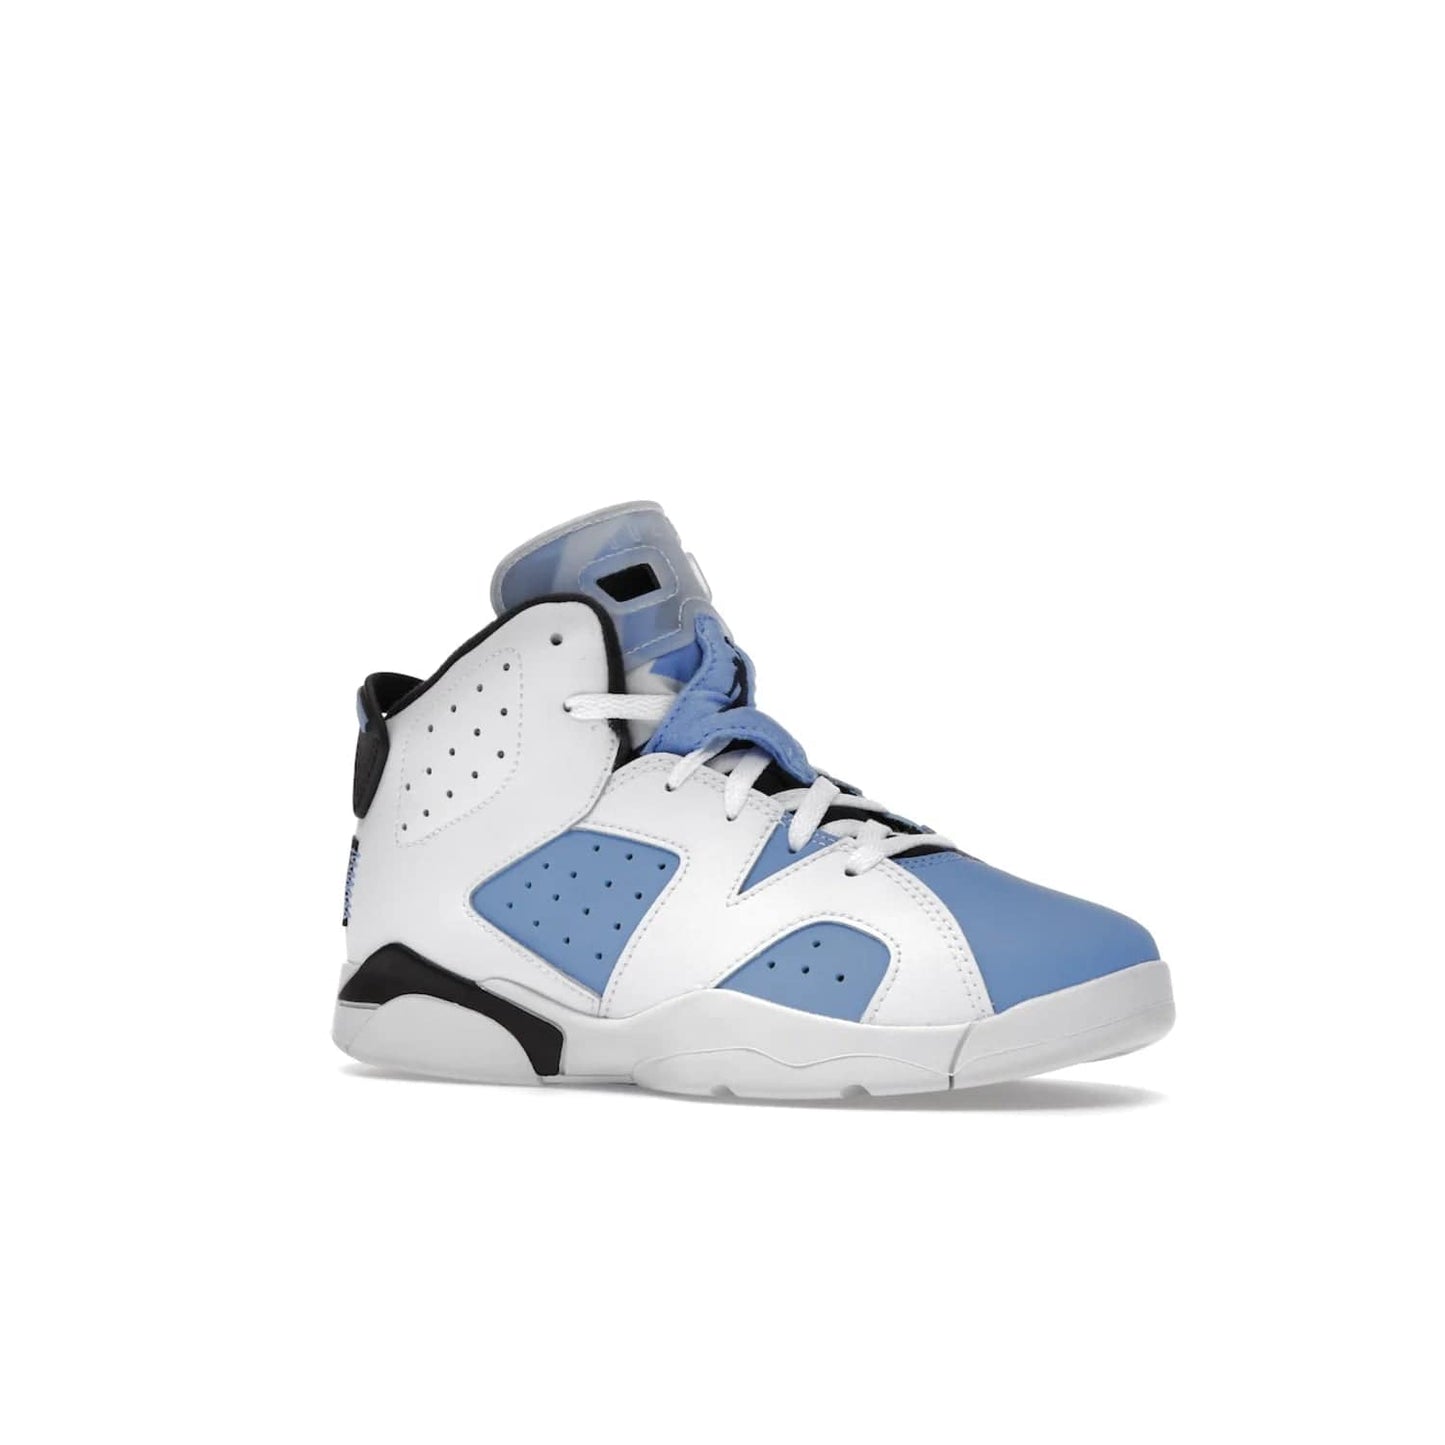 Jordan 6 Retro UNC White (PS) - Image 4 - Only at www.BallersClubKickz.com - The Air Jordan 6 Retro UNC White PS celebrates Michael Jordan's alma mater, the University of North Carolina. It features a classic color-blocking of the iconic Jordan 6 Carmine and a stitched Jordan Team patch. This must-have sneaker released on April 27th, 2022. Referencing the university colors, get this shoe for a stylish and timeless style with university pride.